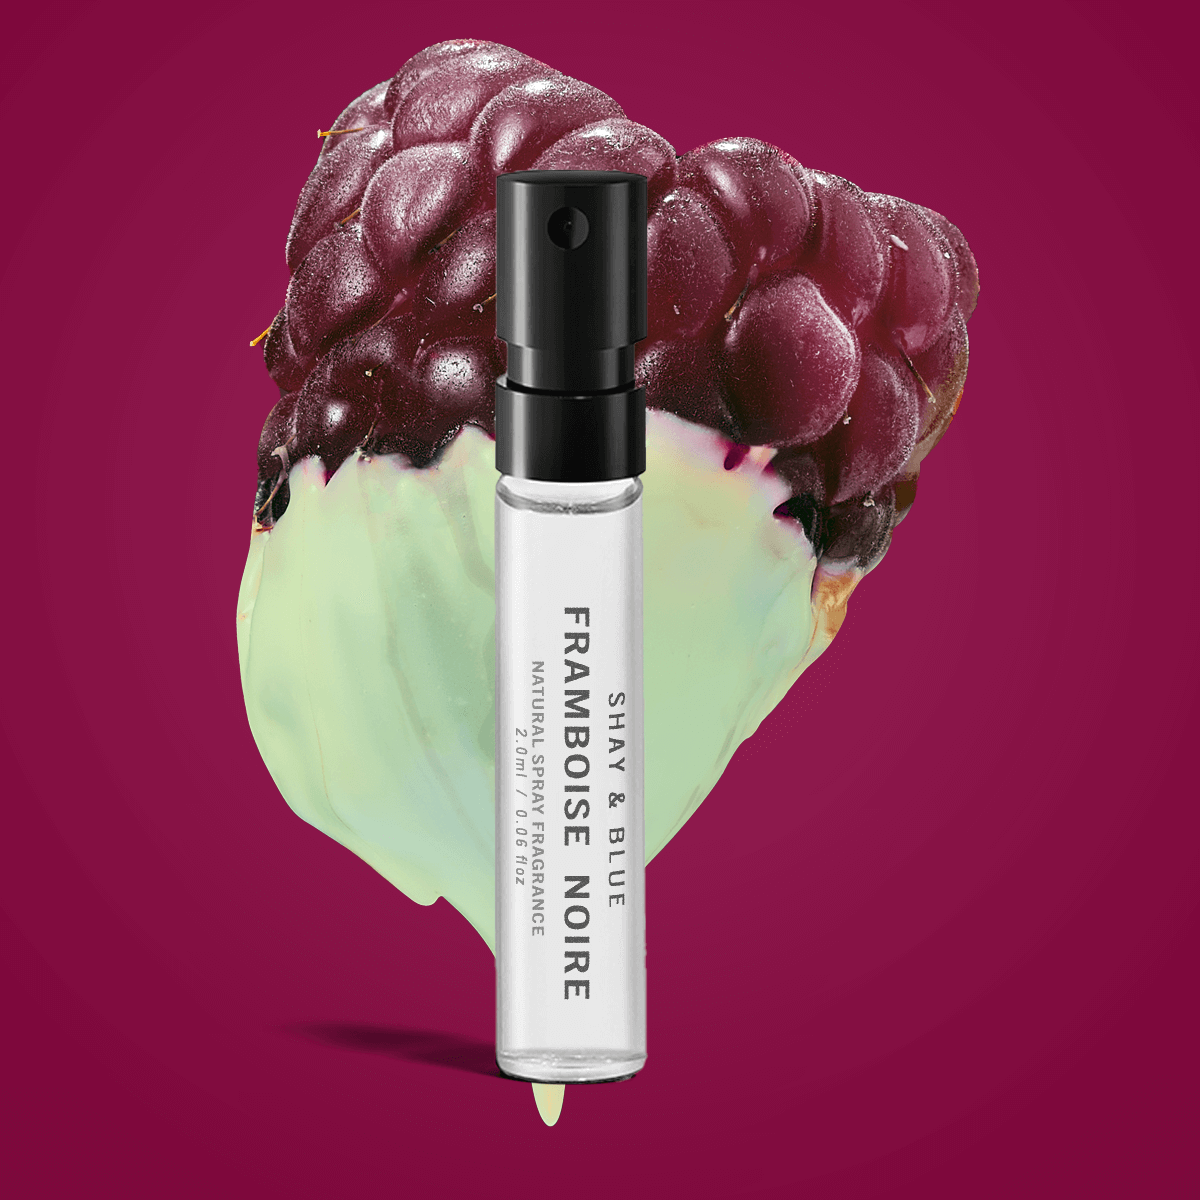 Framboise Noire Fragrance 2ml | Black raspberry and forest berries deepen with the heart of black wood. | Clean All Gender Fragrance | Shay & Blue